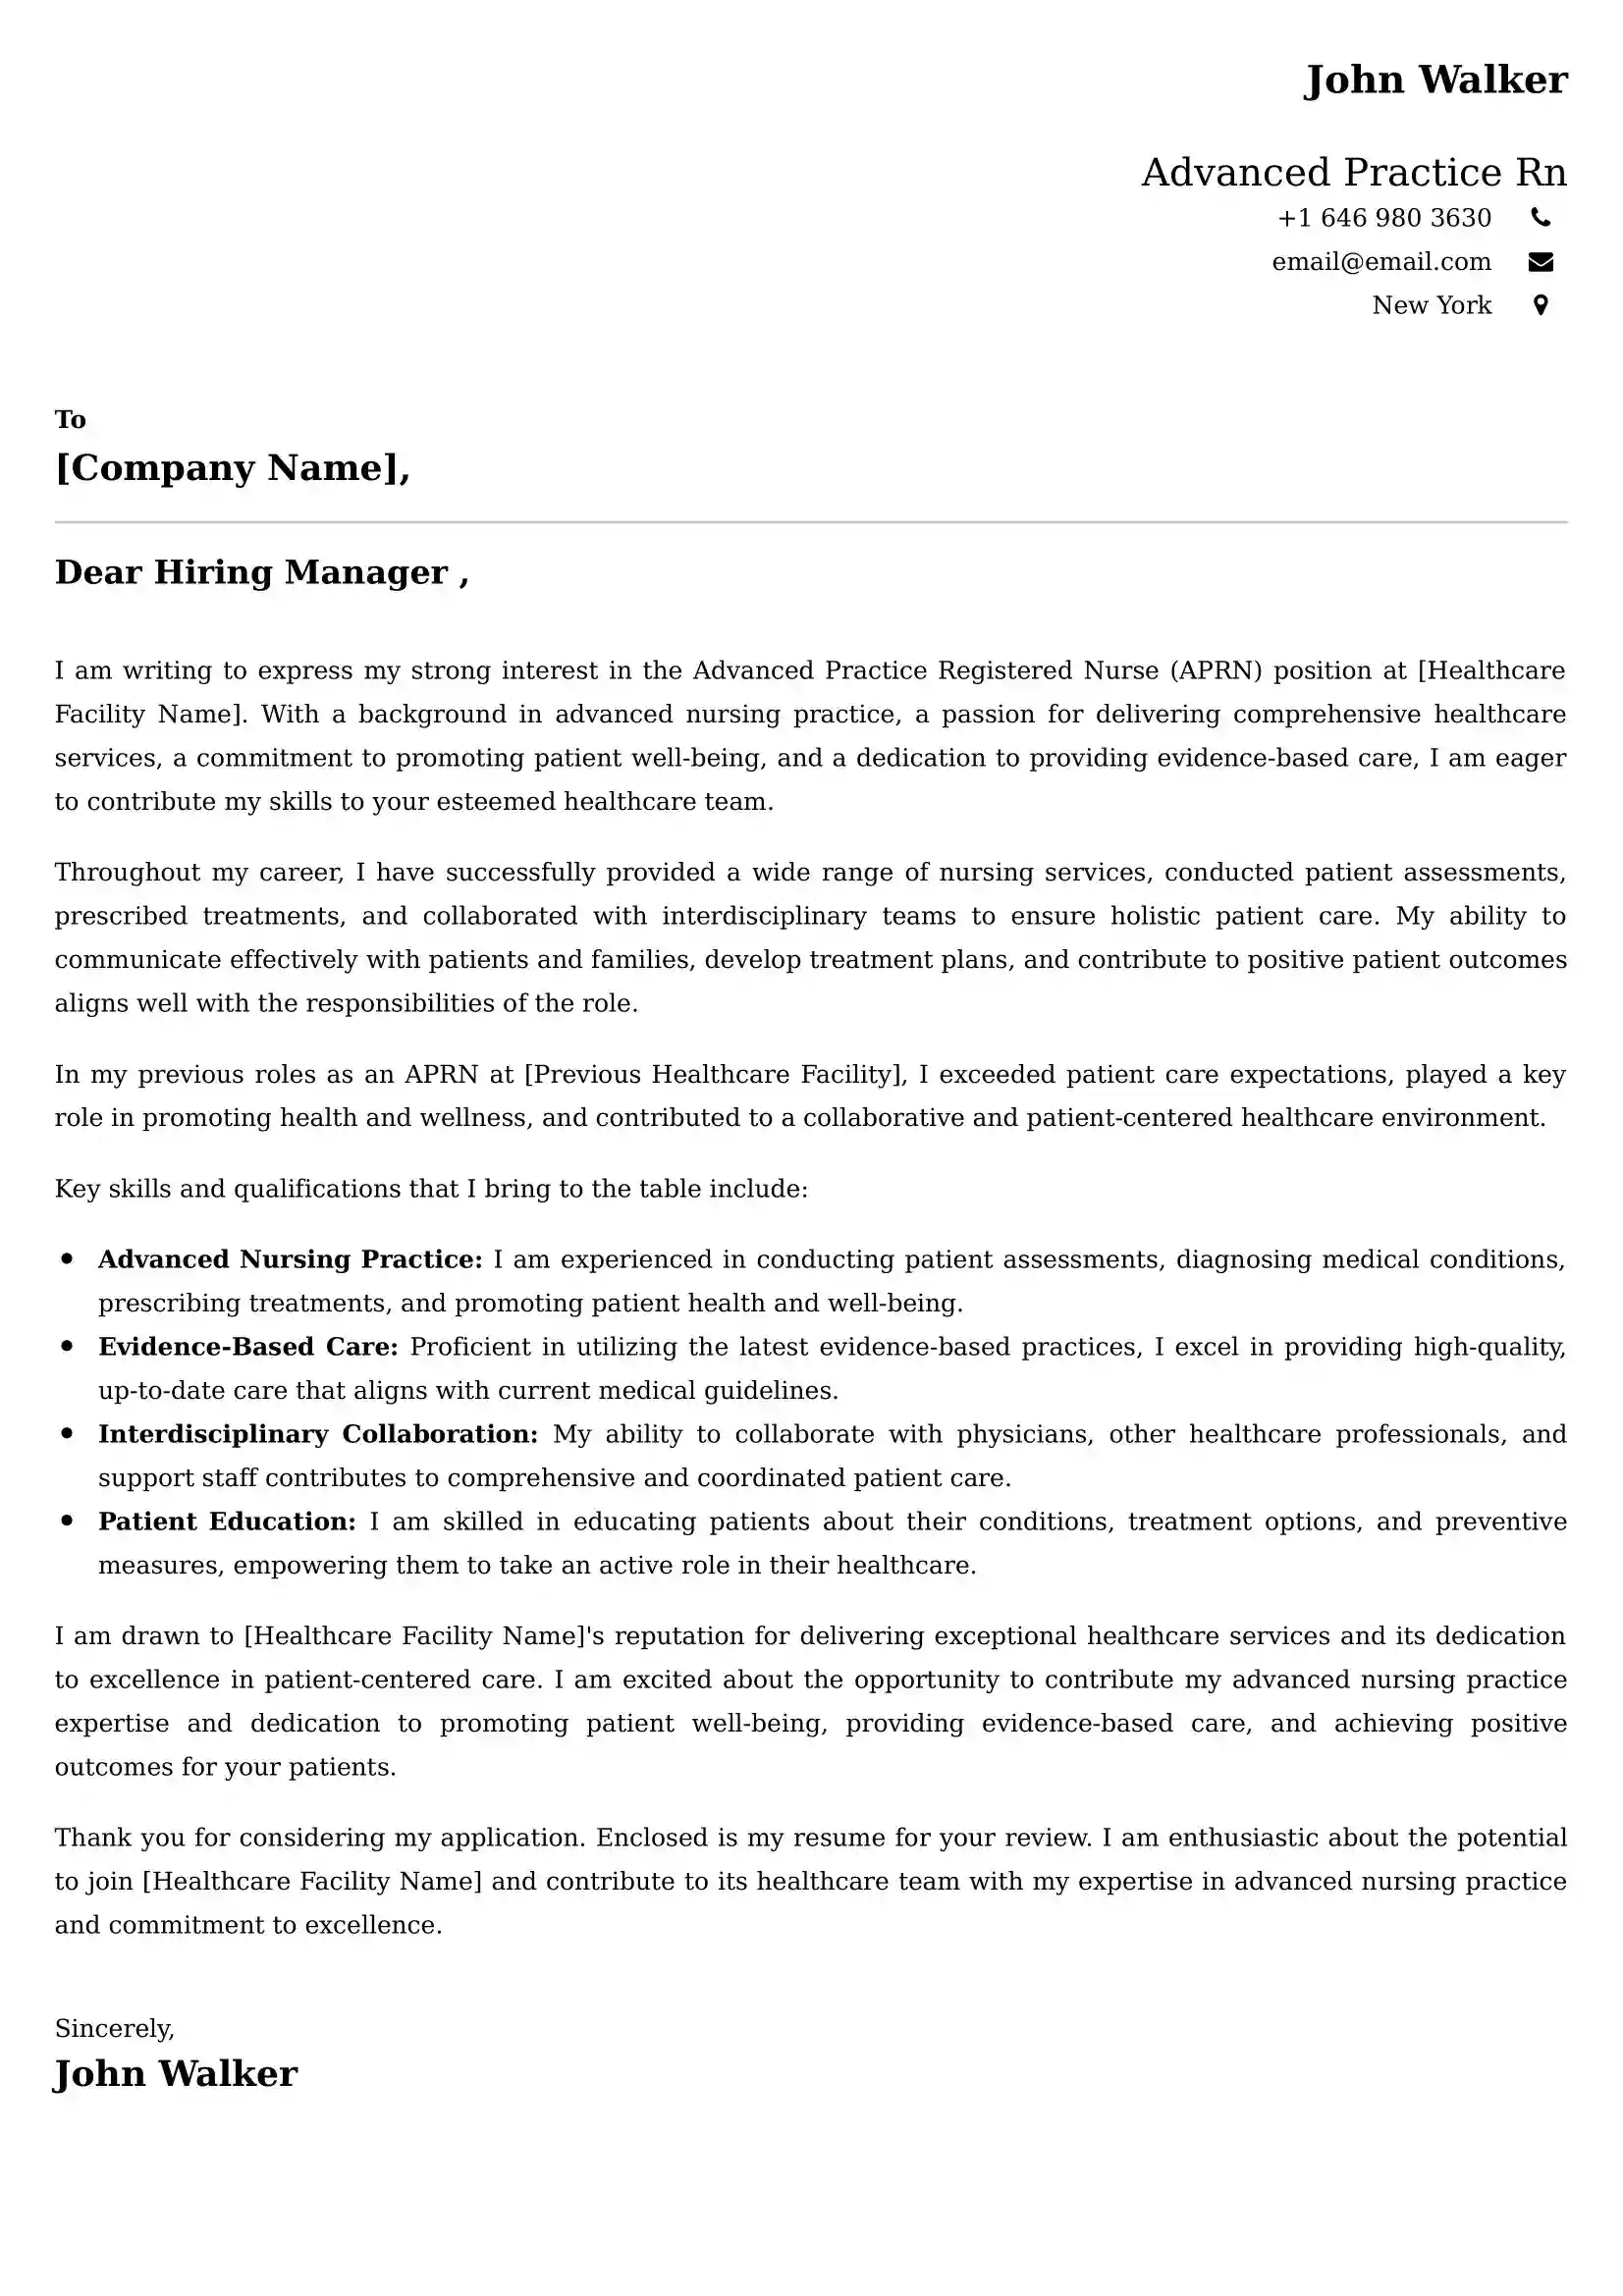 Advanced Practice Rn Cover Letter Examples Australia